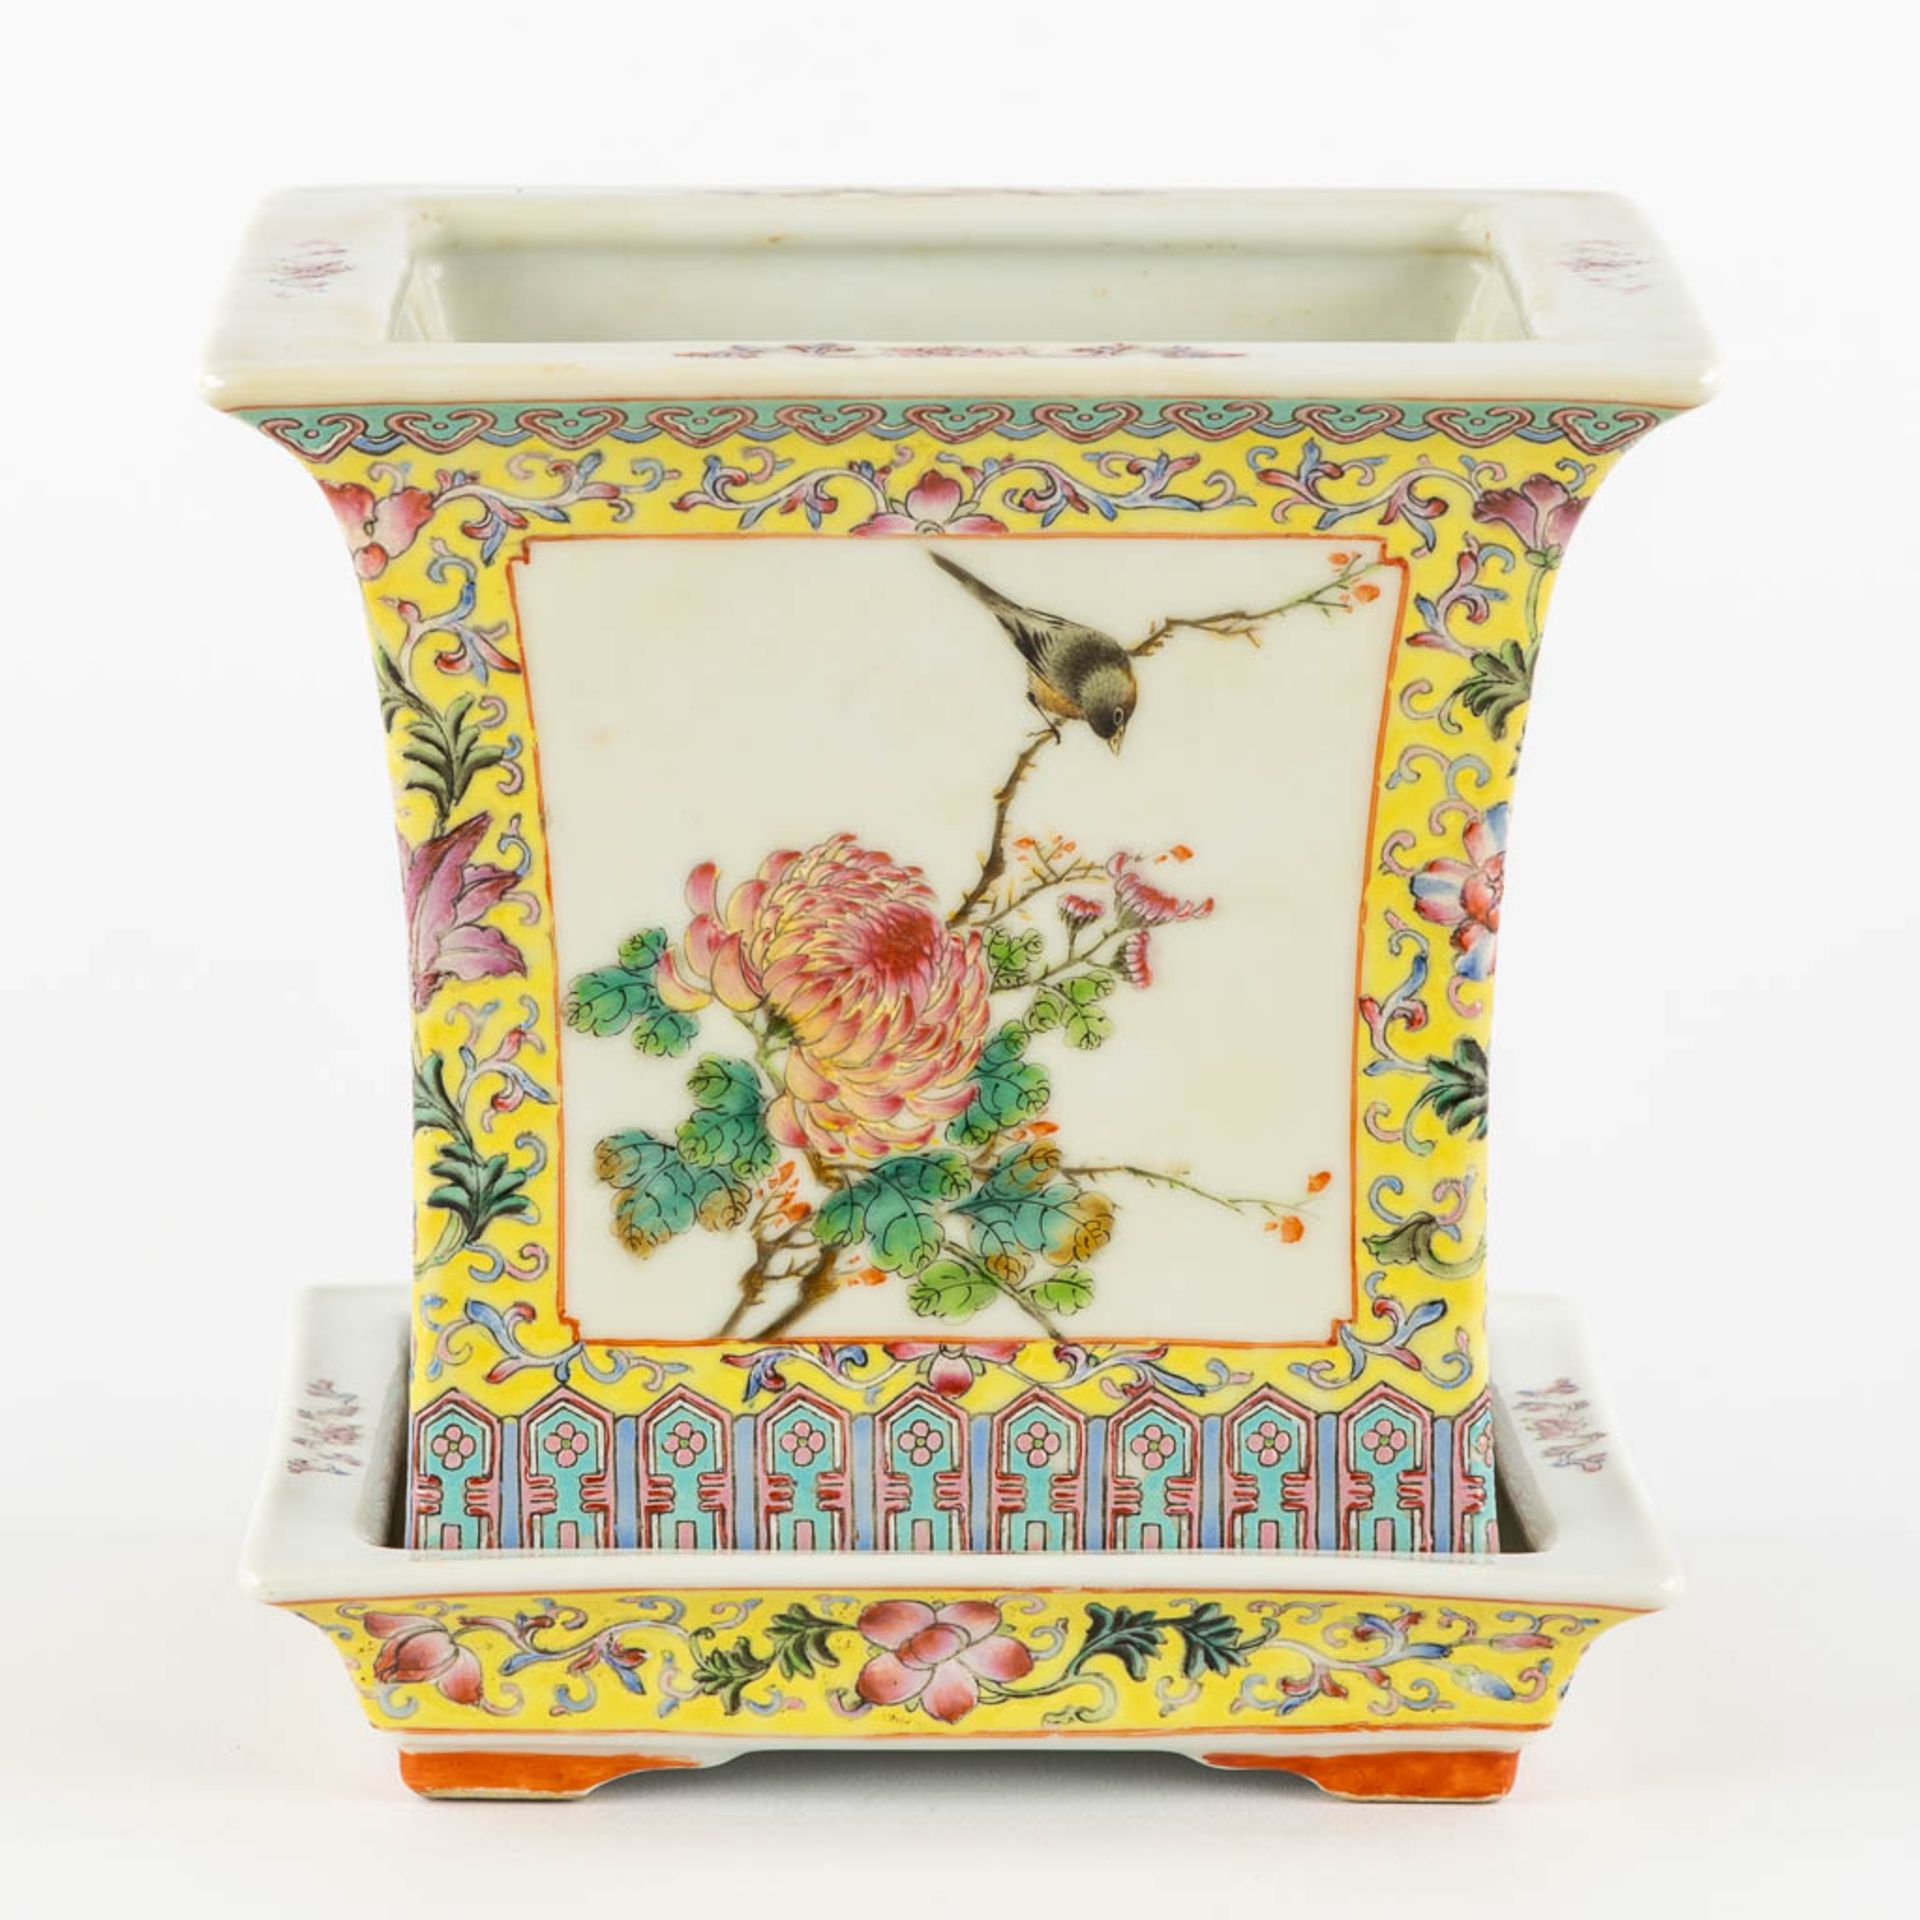 A Chinese Cache Pot, Famille Rose decorated with fauna and flora. (L:18 x W:18 x H:17,5 cm) - Image 3 of 13